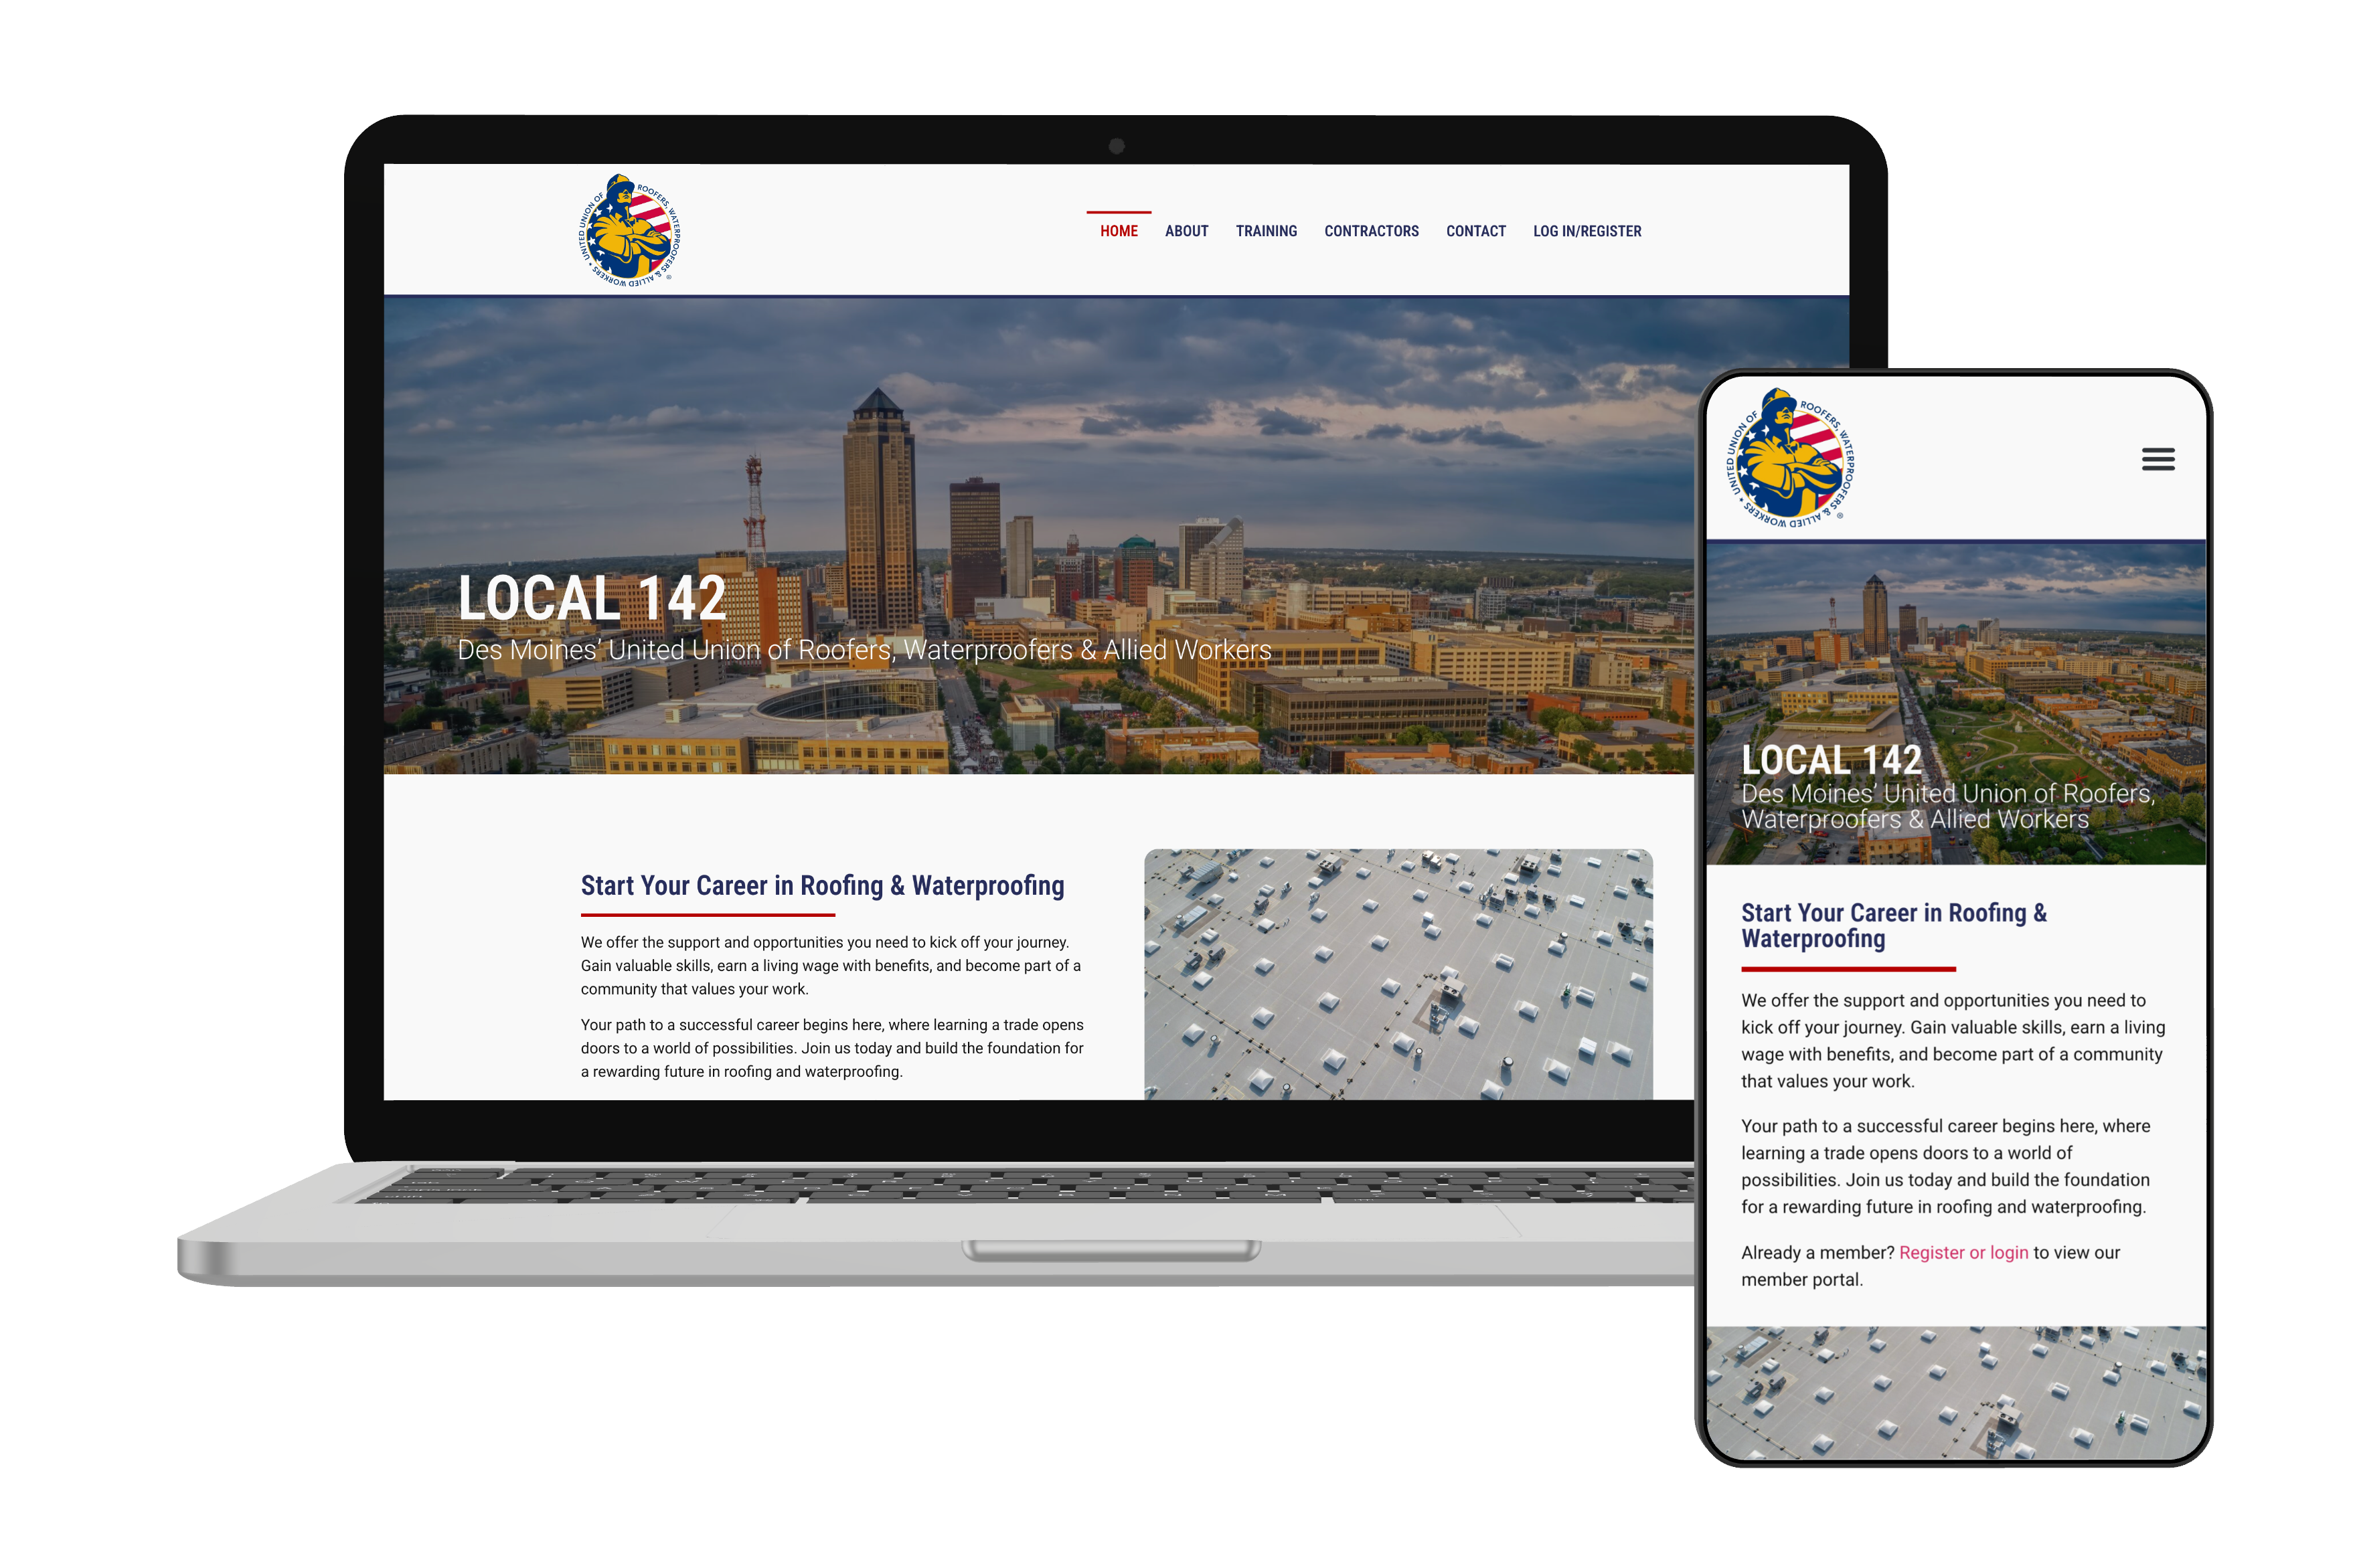 Visual mockup of Local 142 website rendered on a laptop and smartphone.